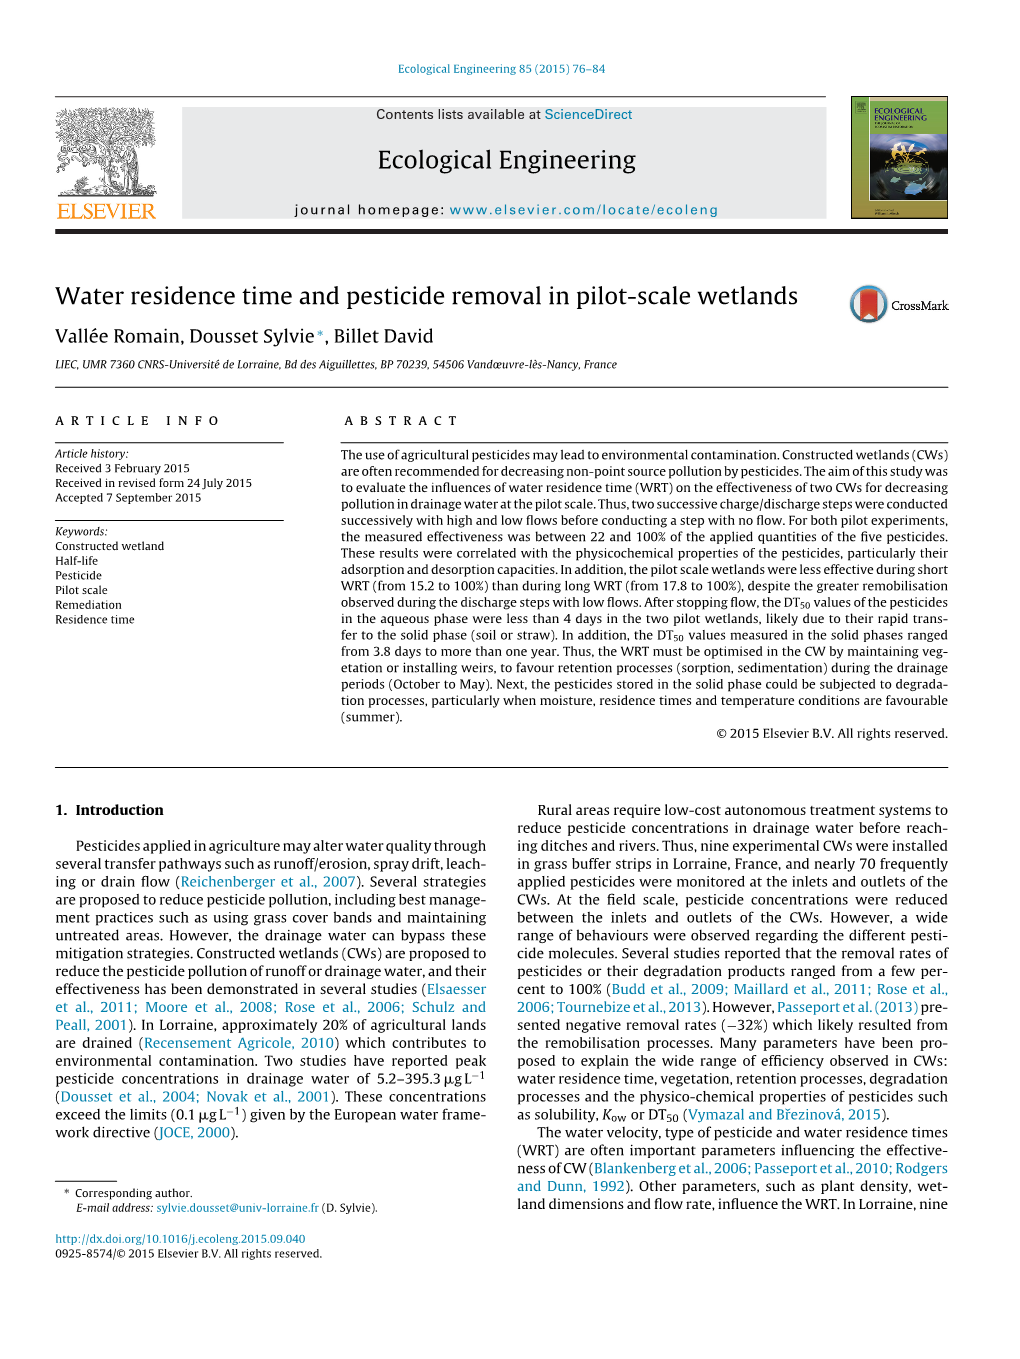 Water Residence Time and Pesticide Removal in Pilot-Scale Wetlands